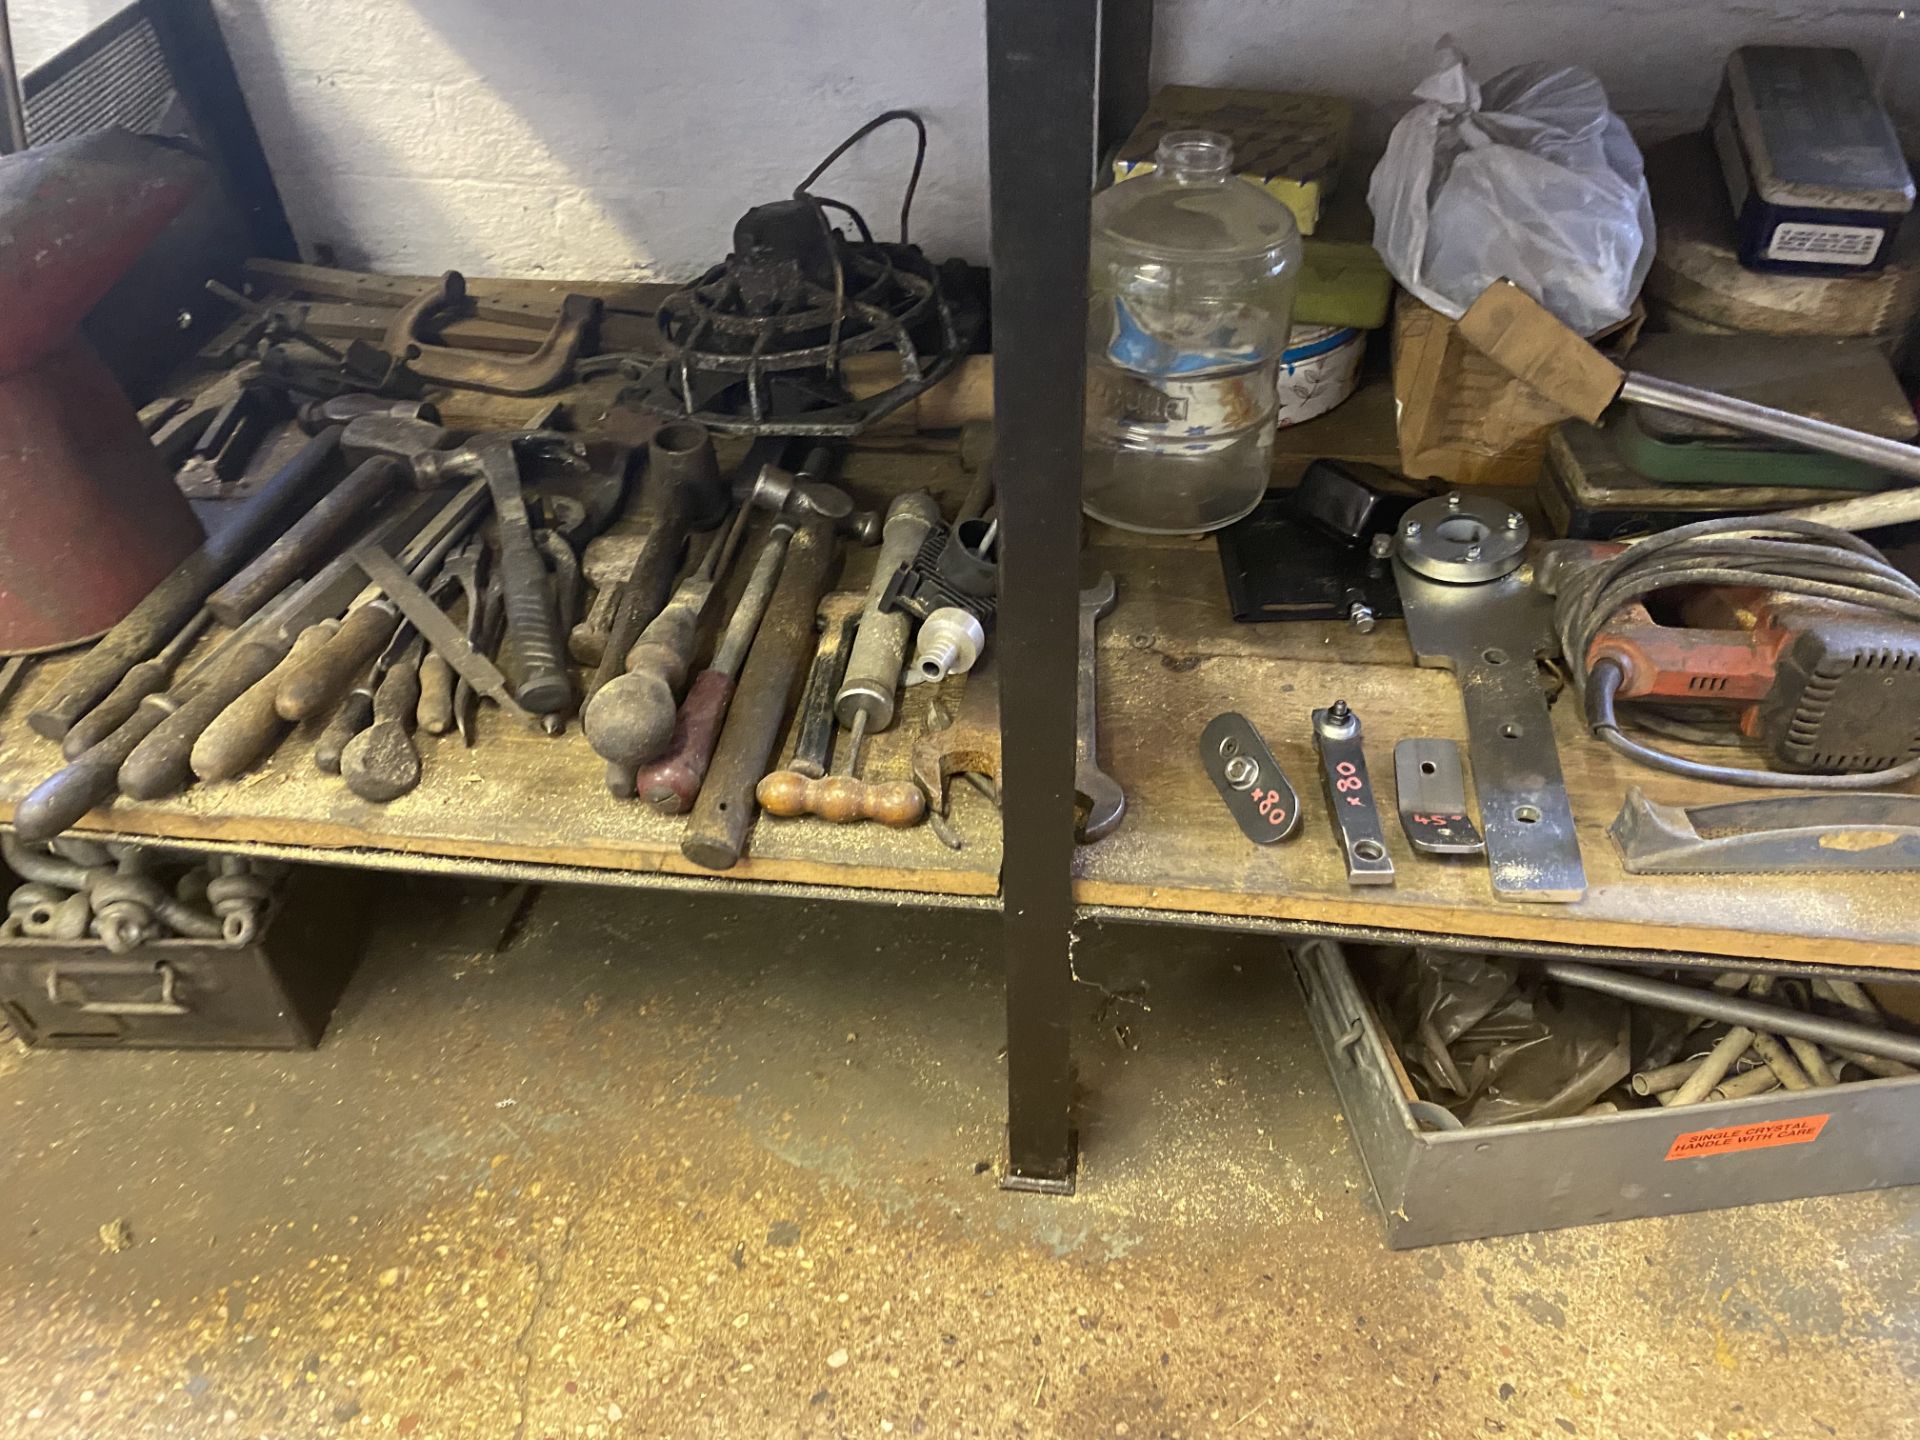 Metal Work Bench, Vice and Contents - Image 2 of 2